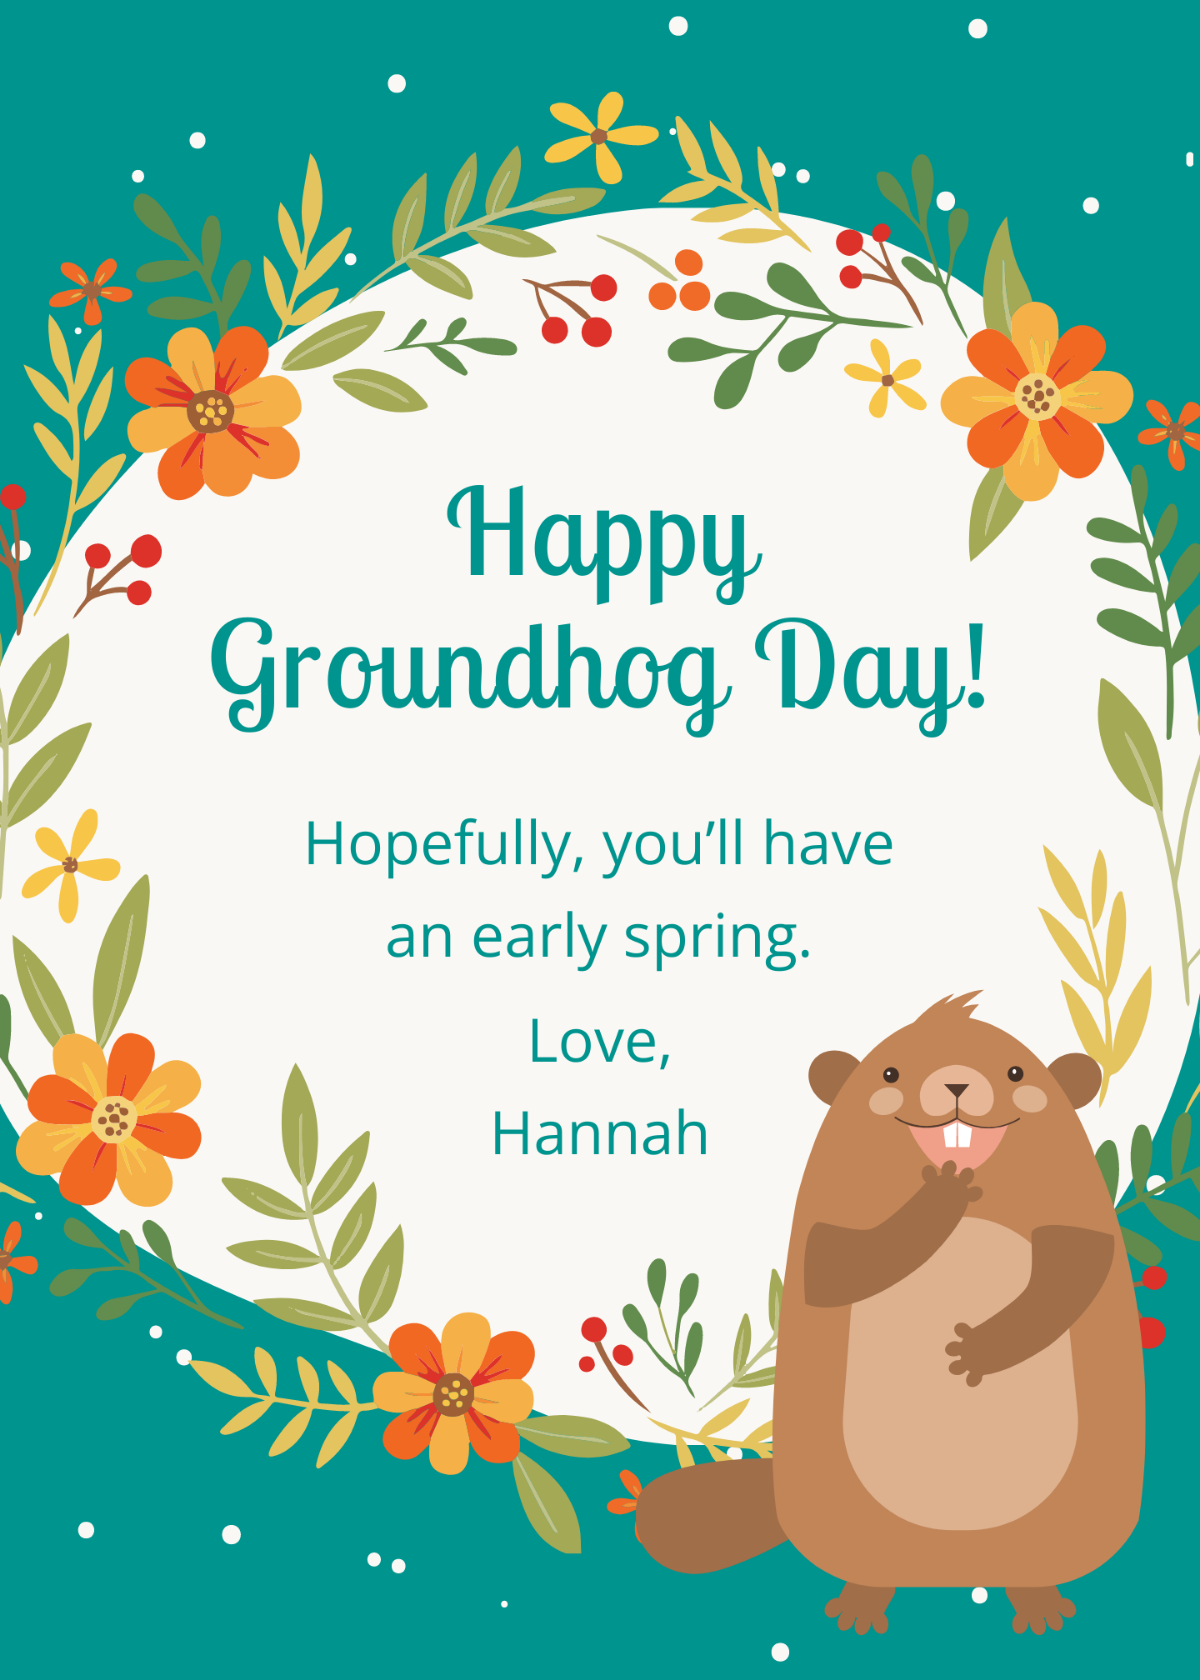 Happy Groundhog Day Greeting Card Template